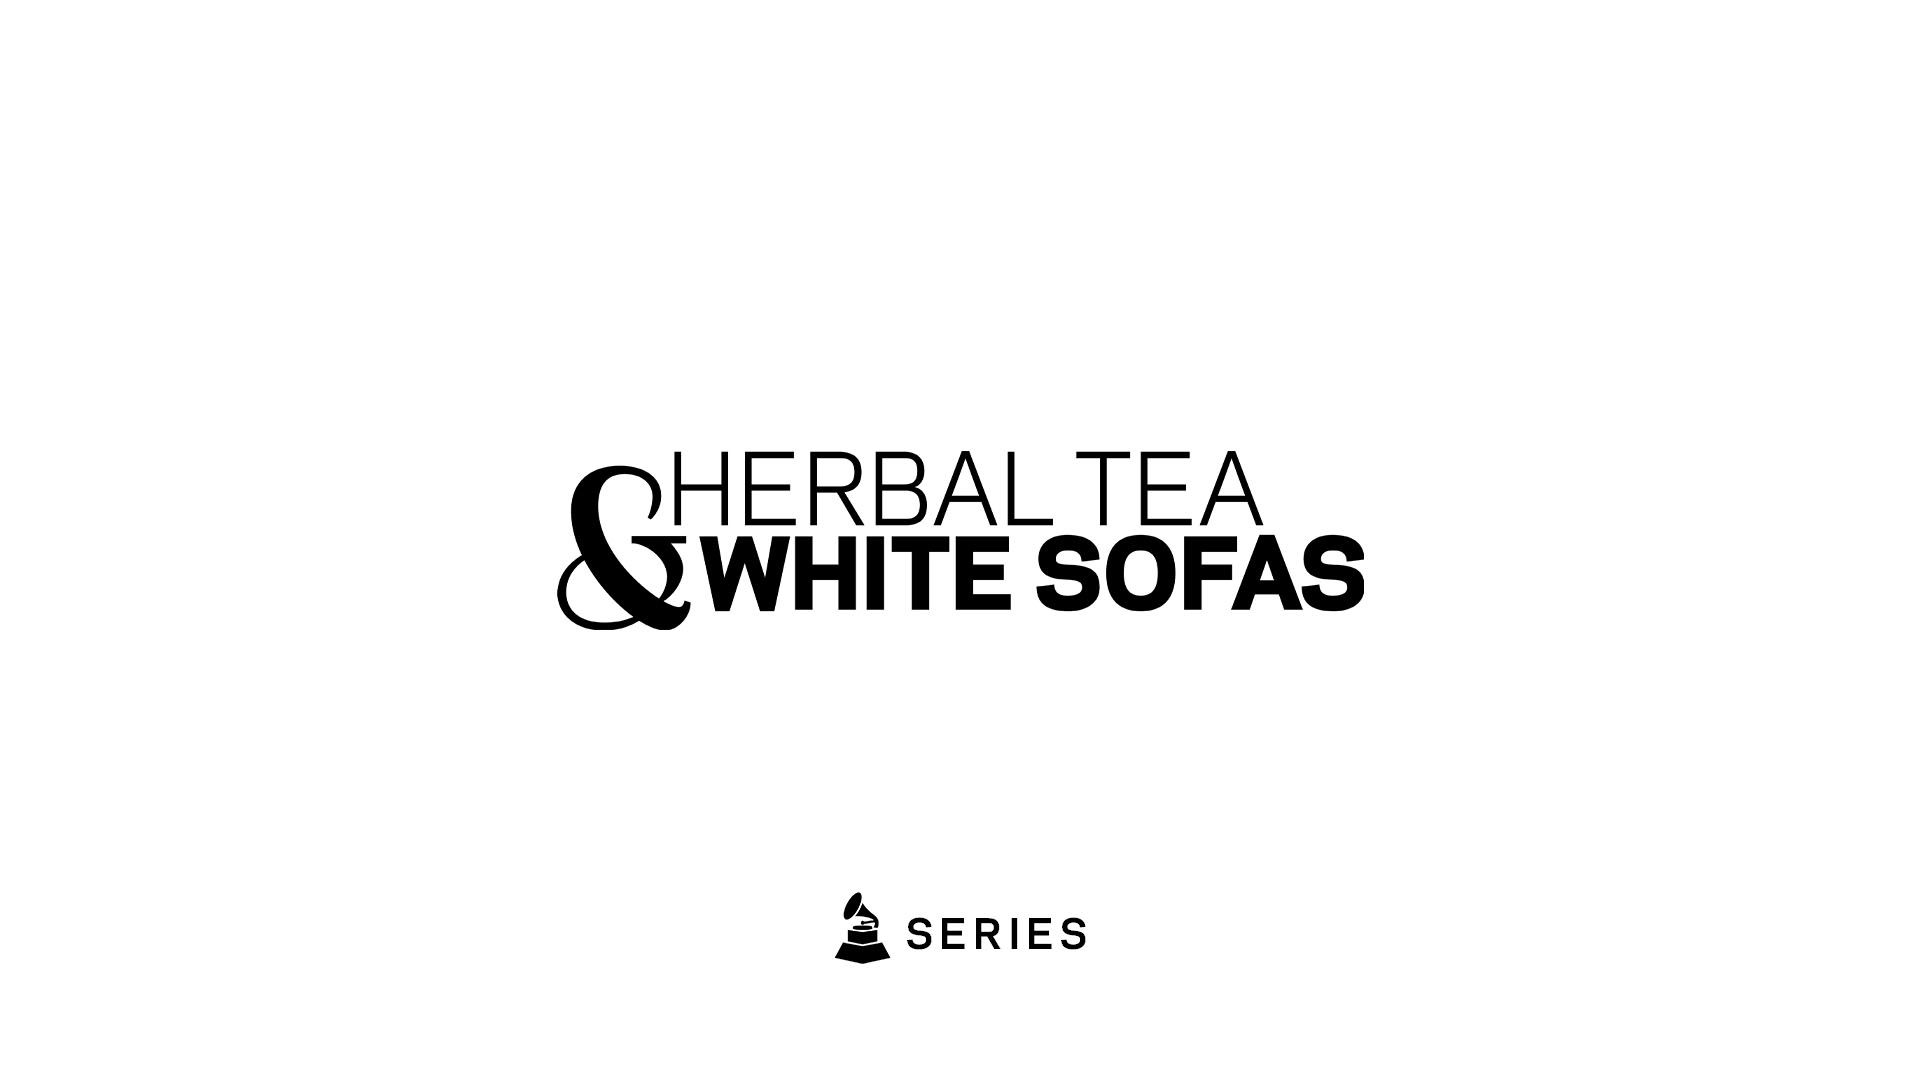 Ayra Starr’s Most Essential “Item” On The Road Is Her Brother | Herbal Tea & White Sofas